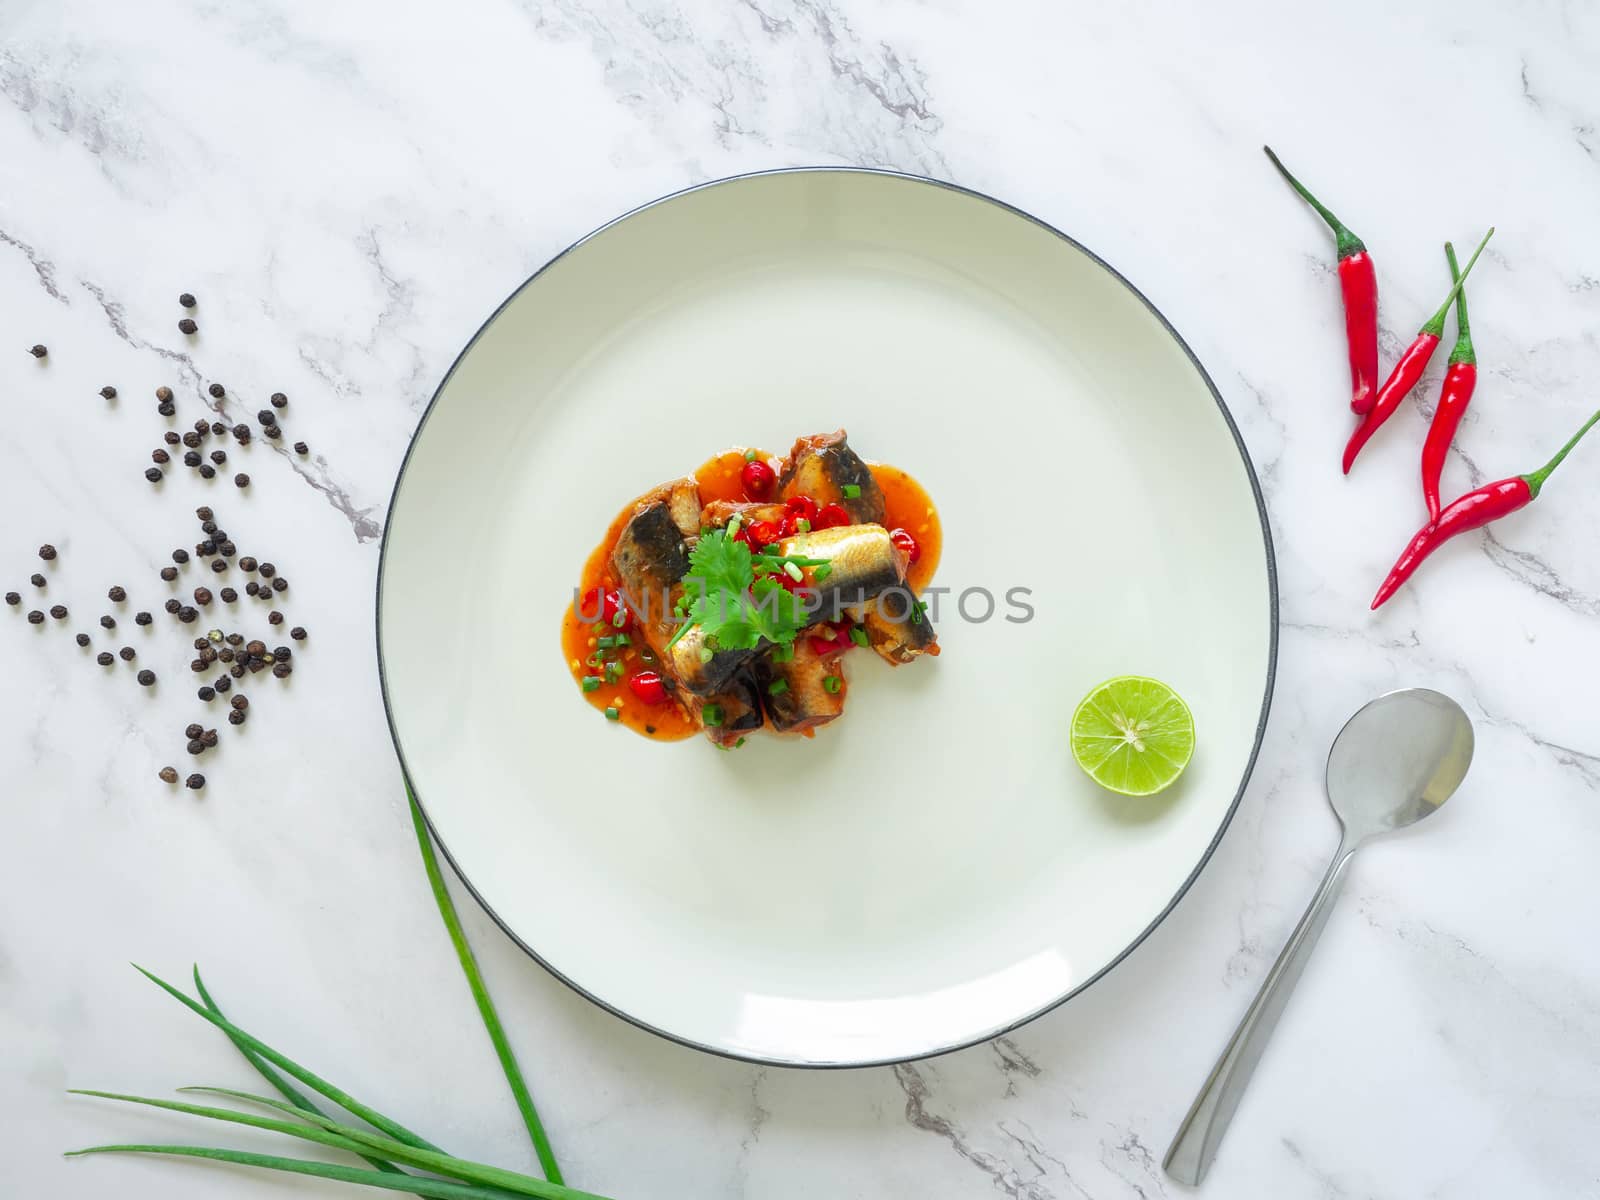 Canned Fish Salad,Thai food Ingredients Fish,Chilies,Lime,Spring onions,Pepper,Coriander,Hot sauce and tomatoes,Is a healthy food,White background